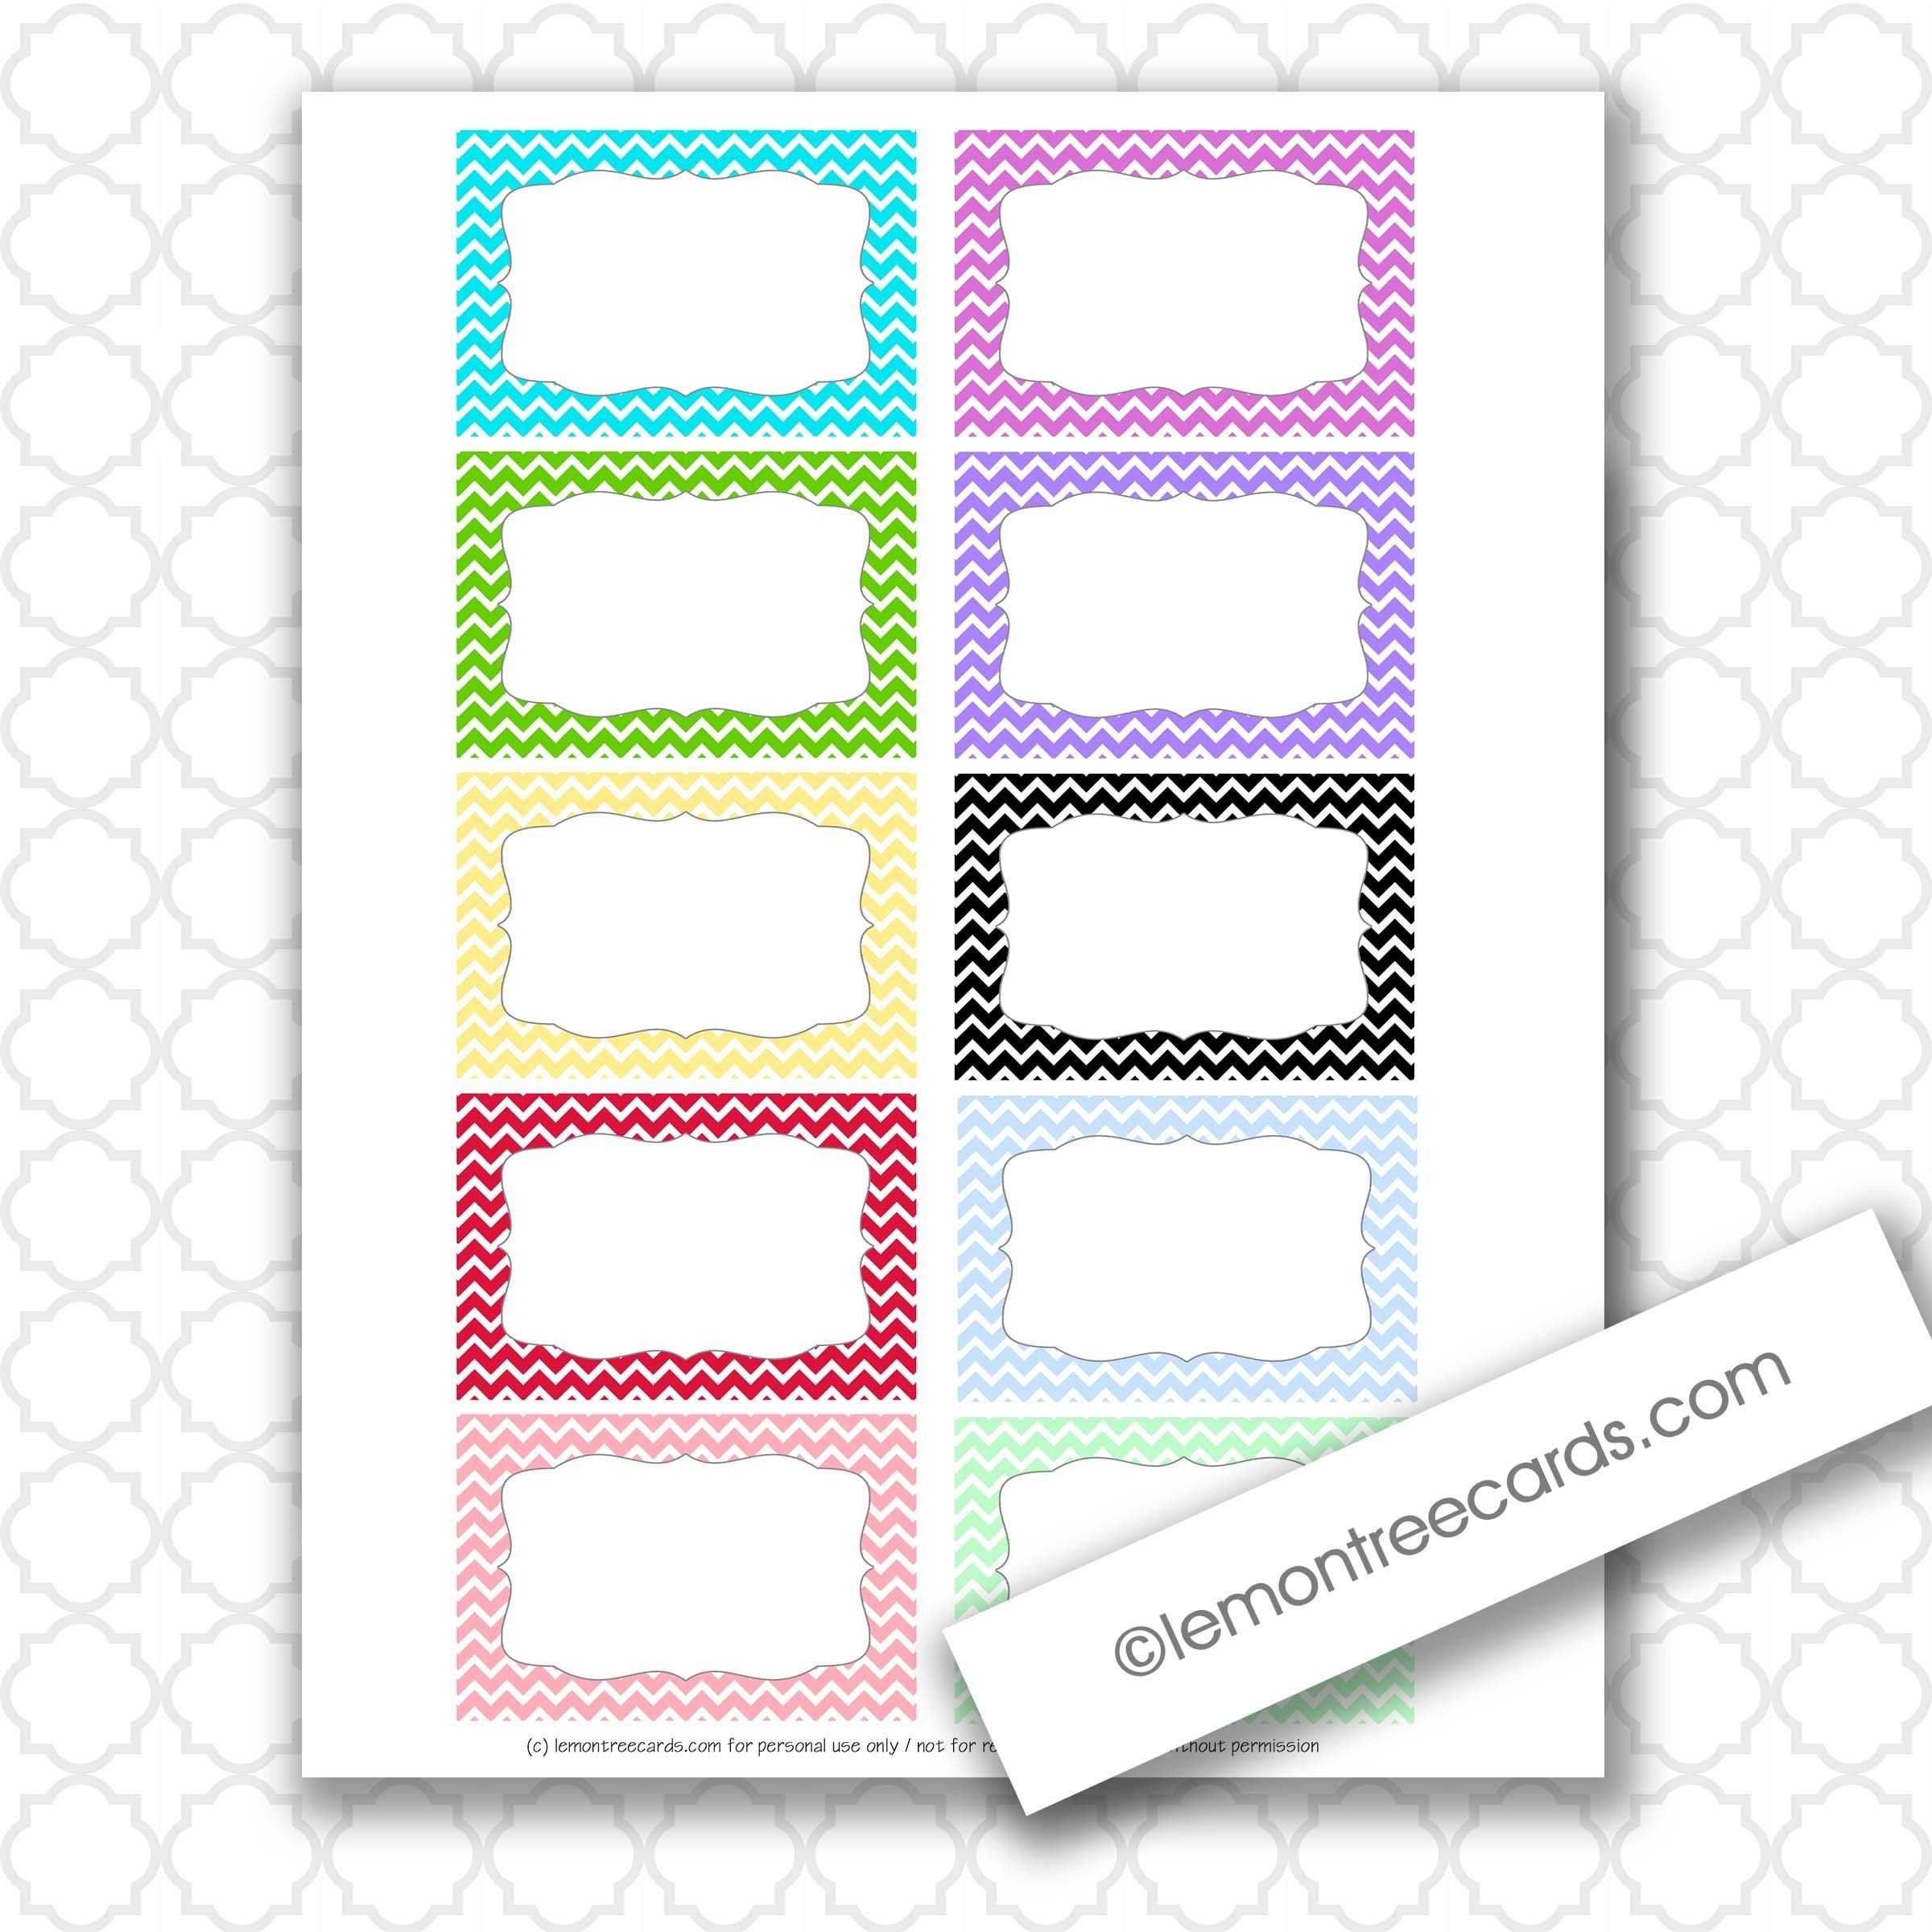 007 Free Index Card Template Ideas Surprising Printable Pertaining To Blank Index Card Template